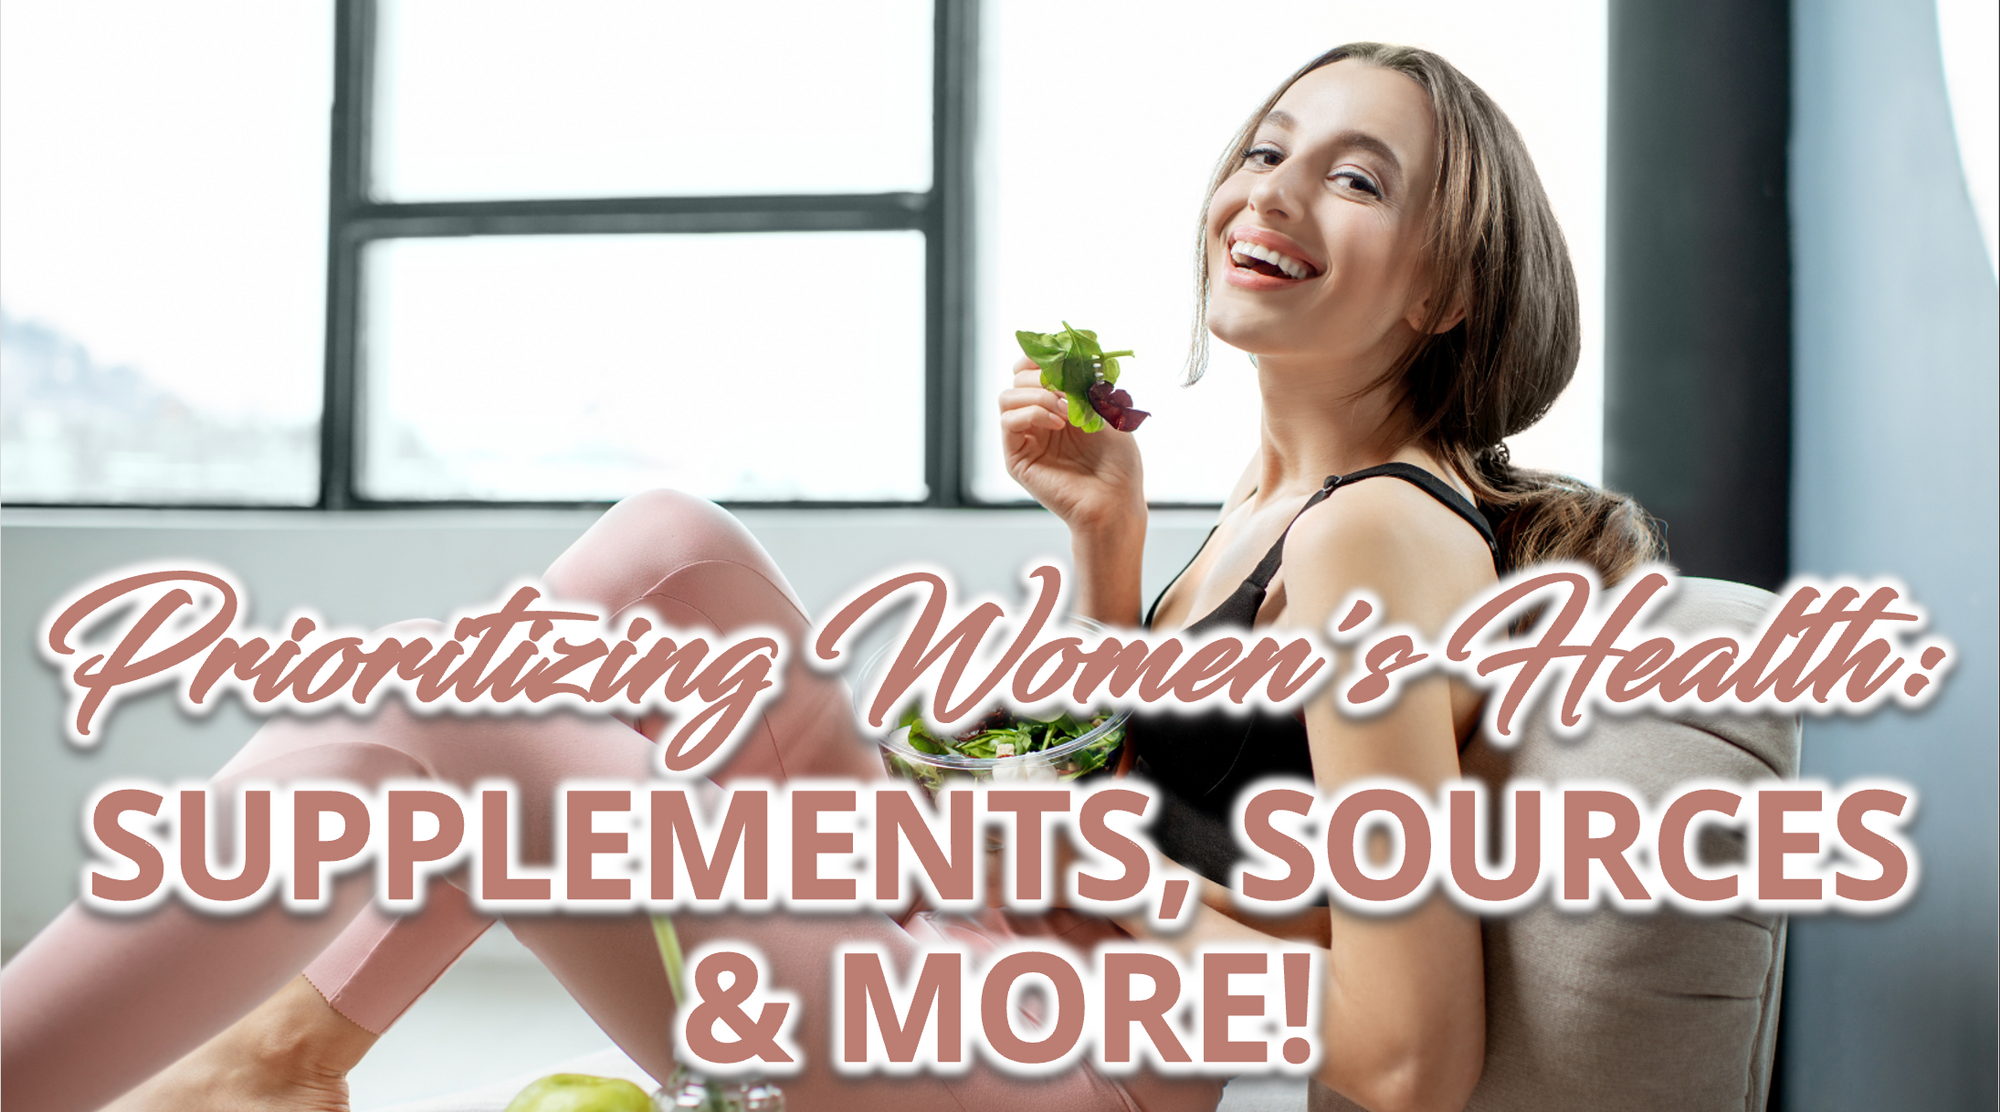 a girl smiling holding a fork with salad, with a text "Prioritizing Women's Health: Supplements, Sources & More!"